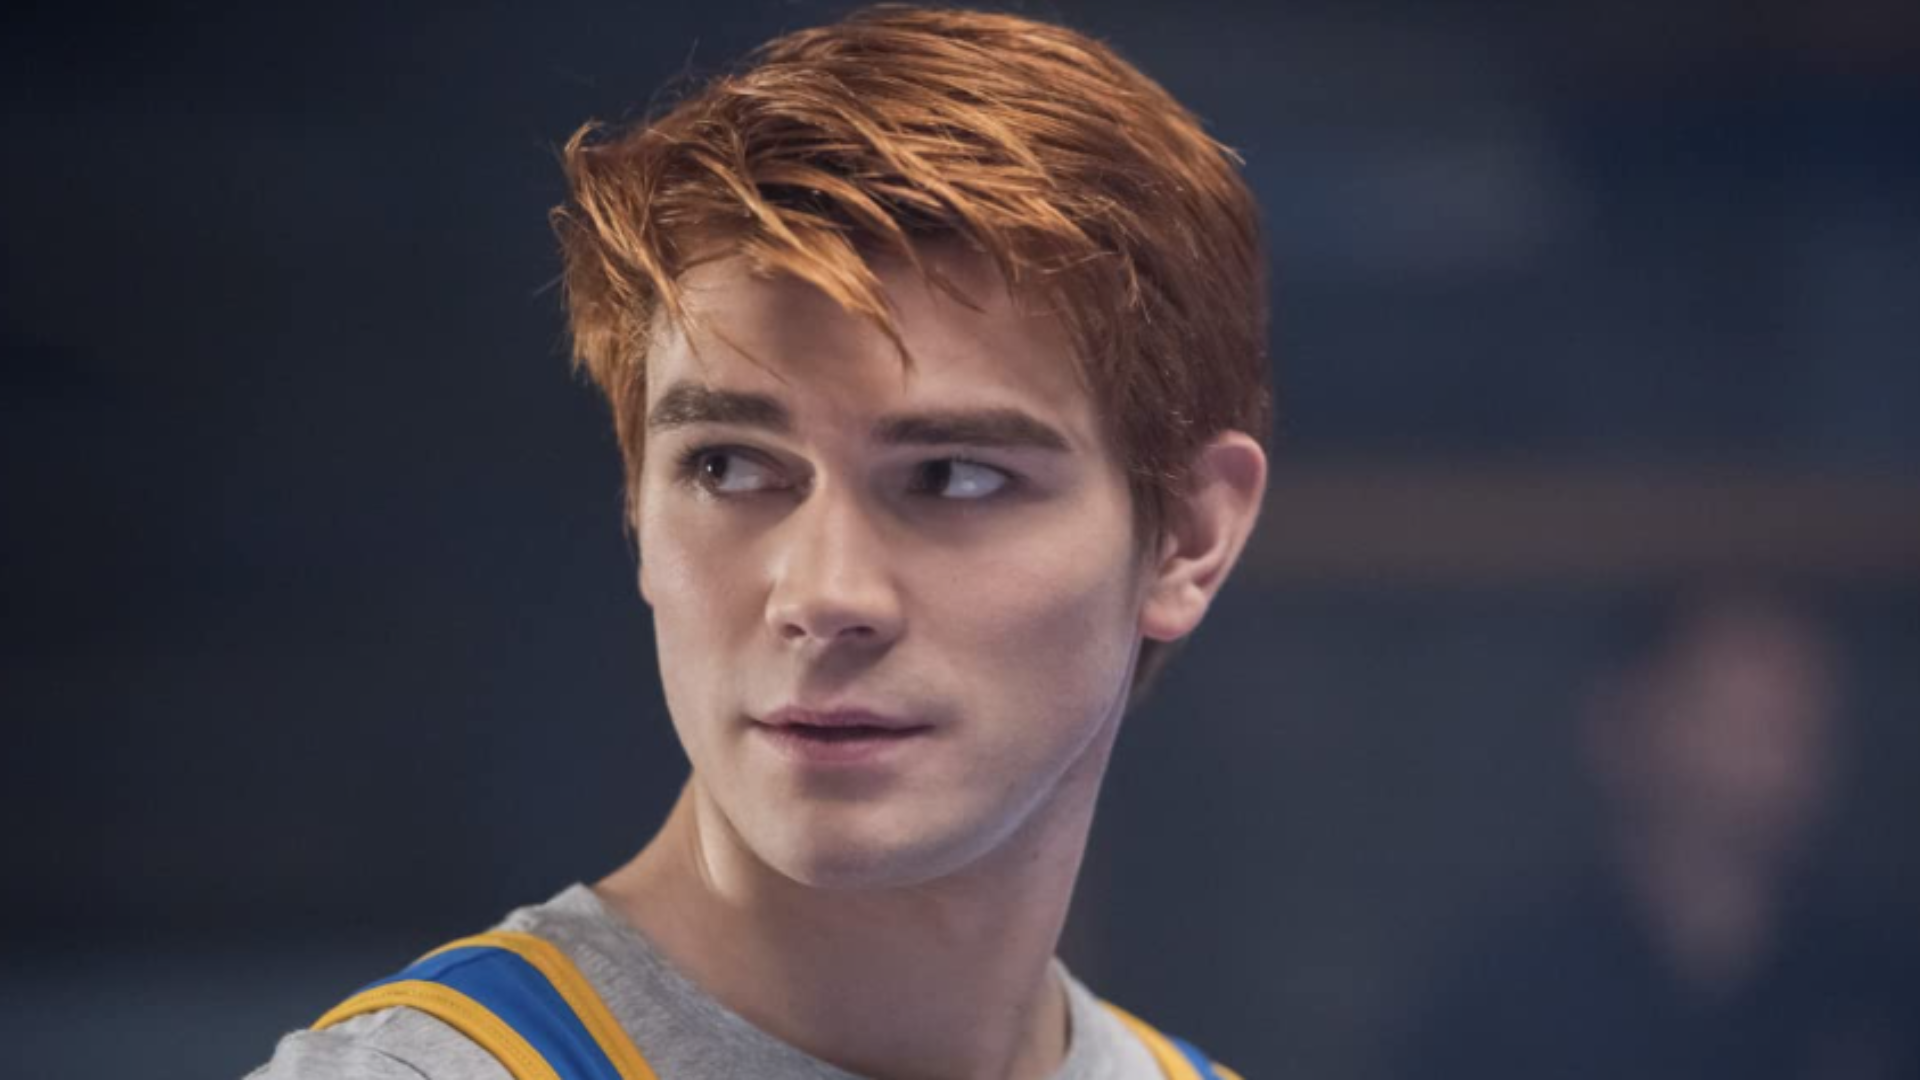 KJ Apa and Isabel May tapped to play DC’s Wonder Twins for HBO Max